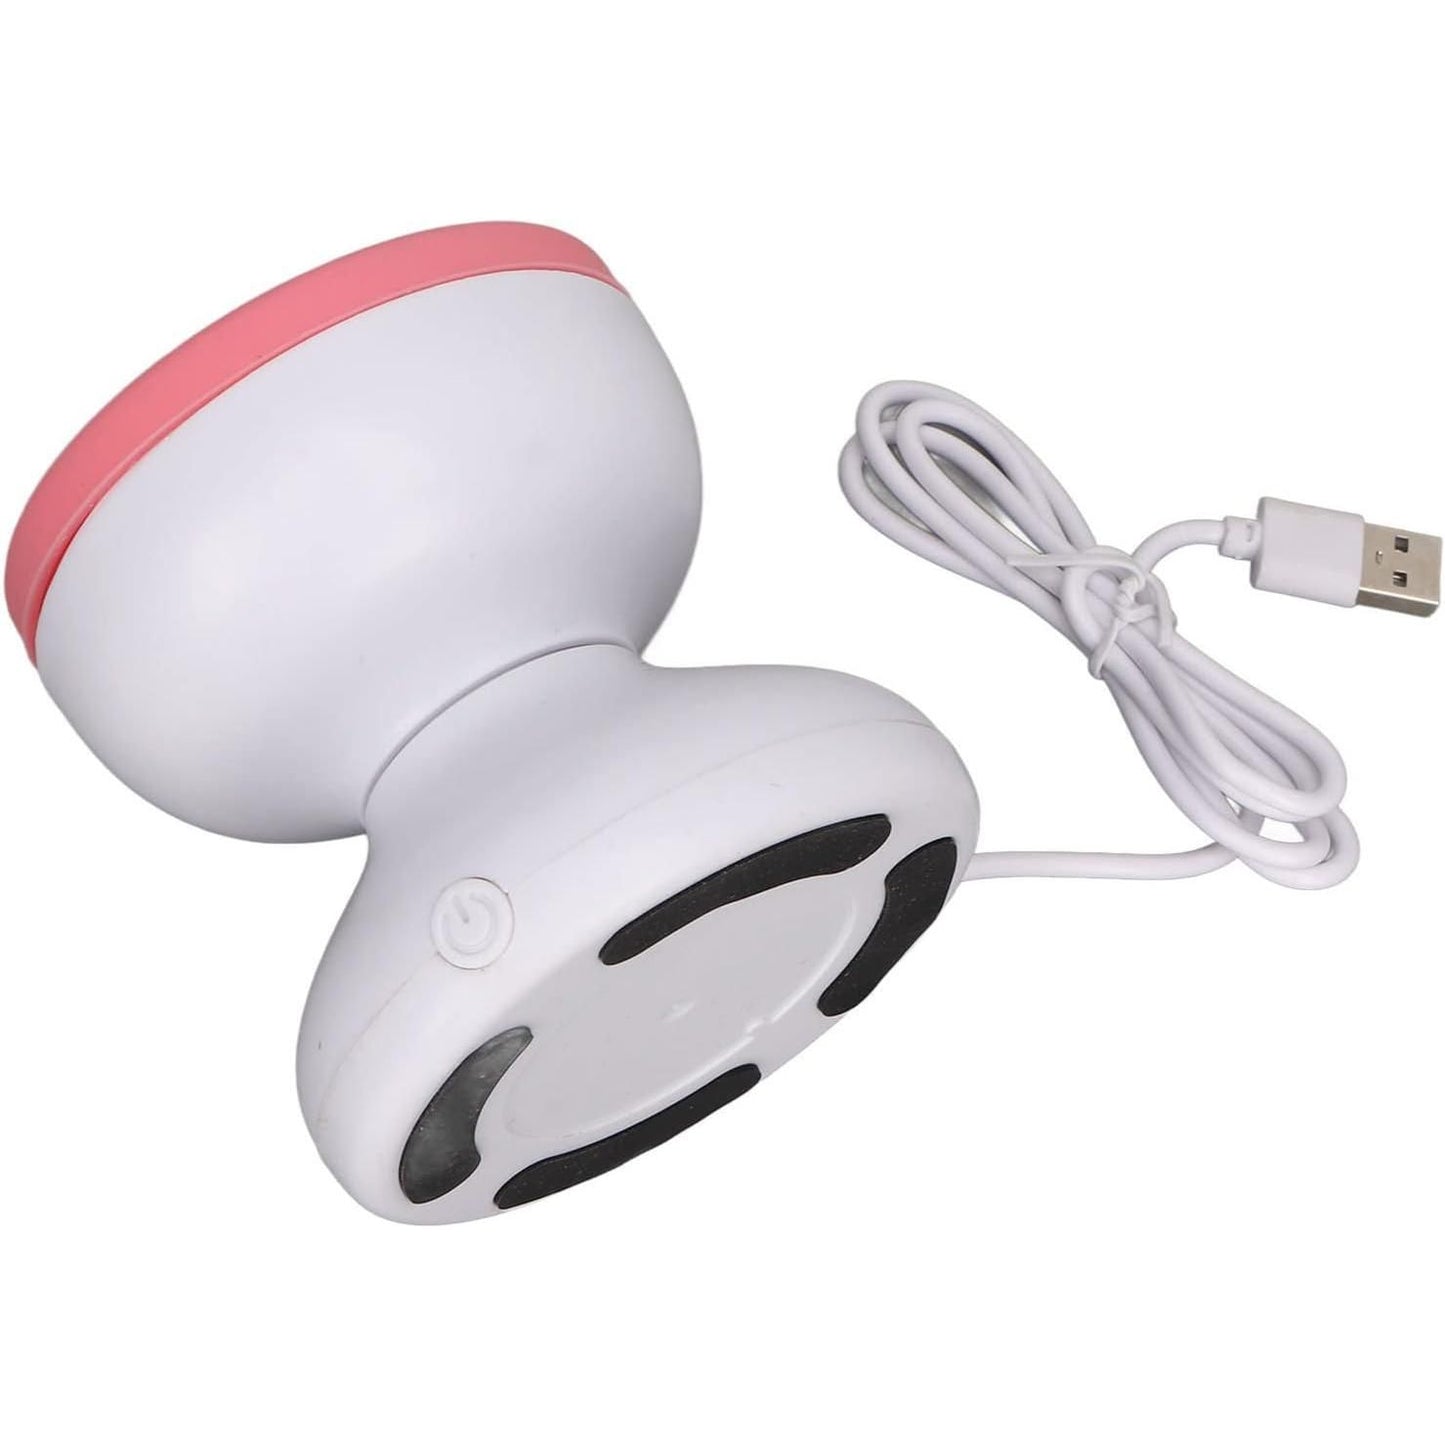 Fast and Efficient USB-Charged Electric Makeup Brush Cleaner and Dryer